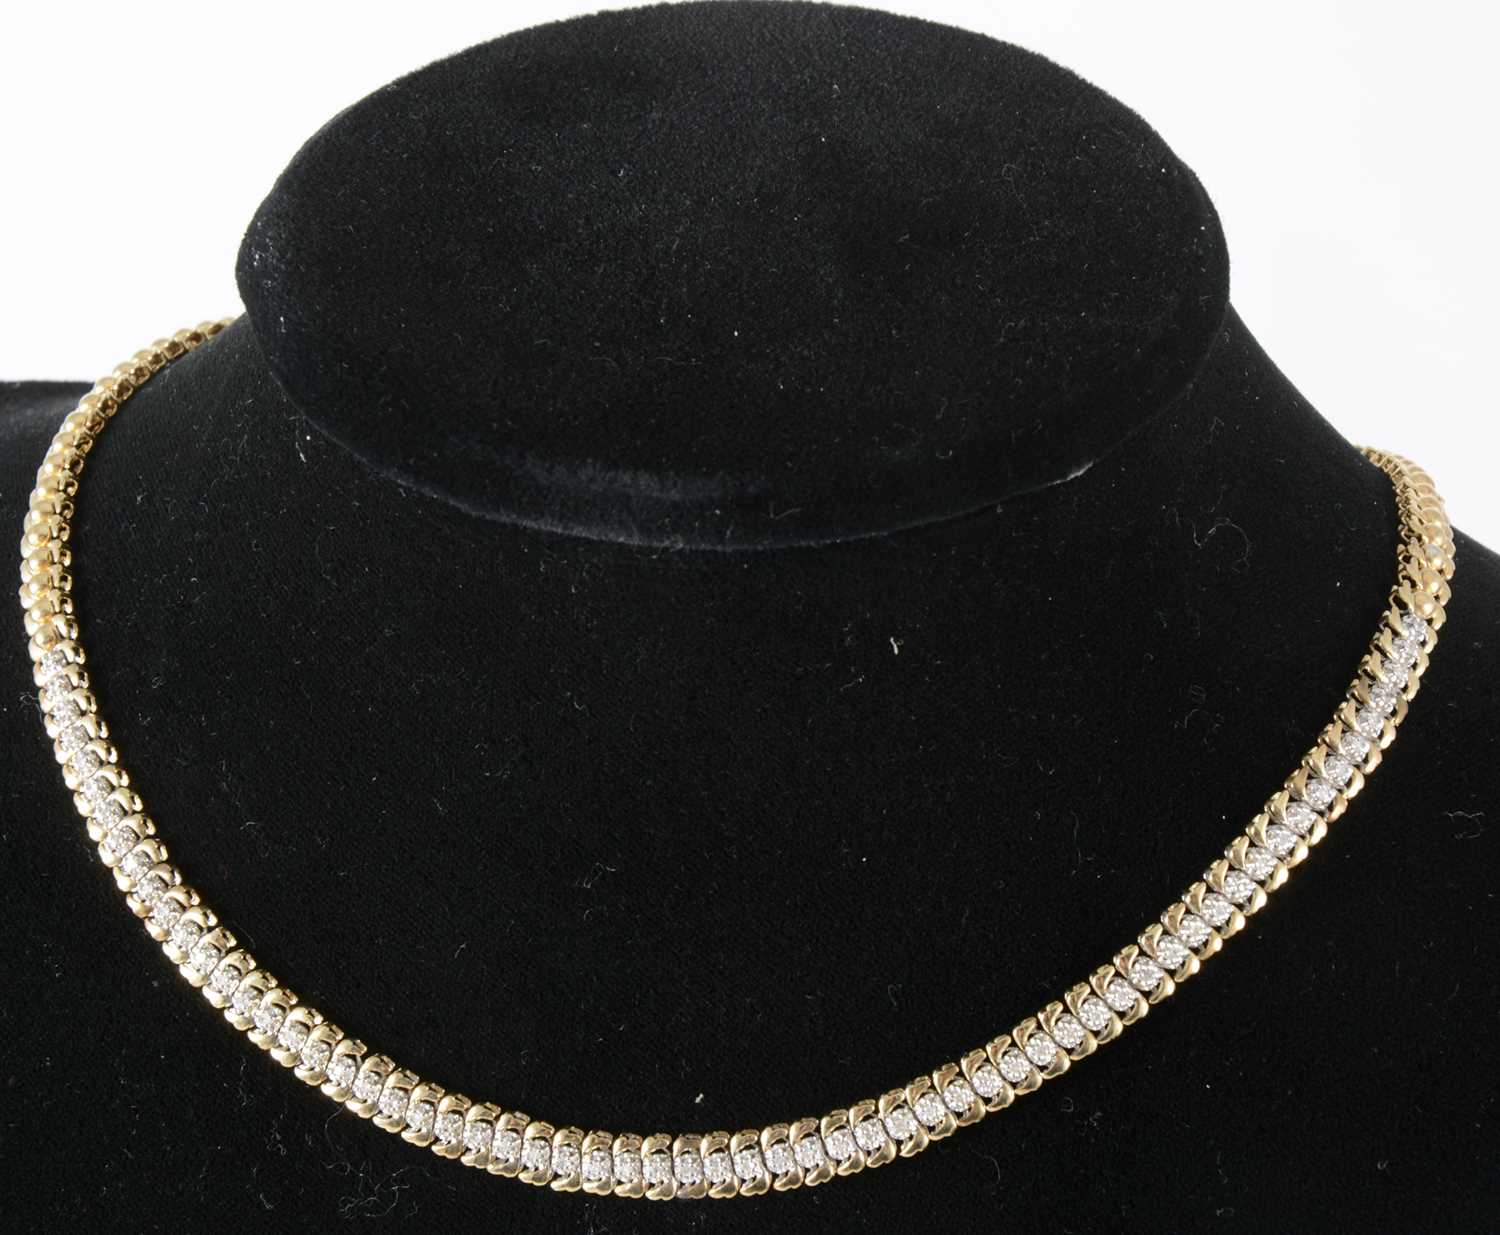 Lot 107 - A 9 carat yellow and white gold collar necklace set with small diamonds.